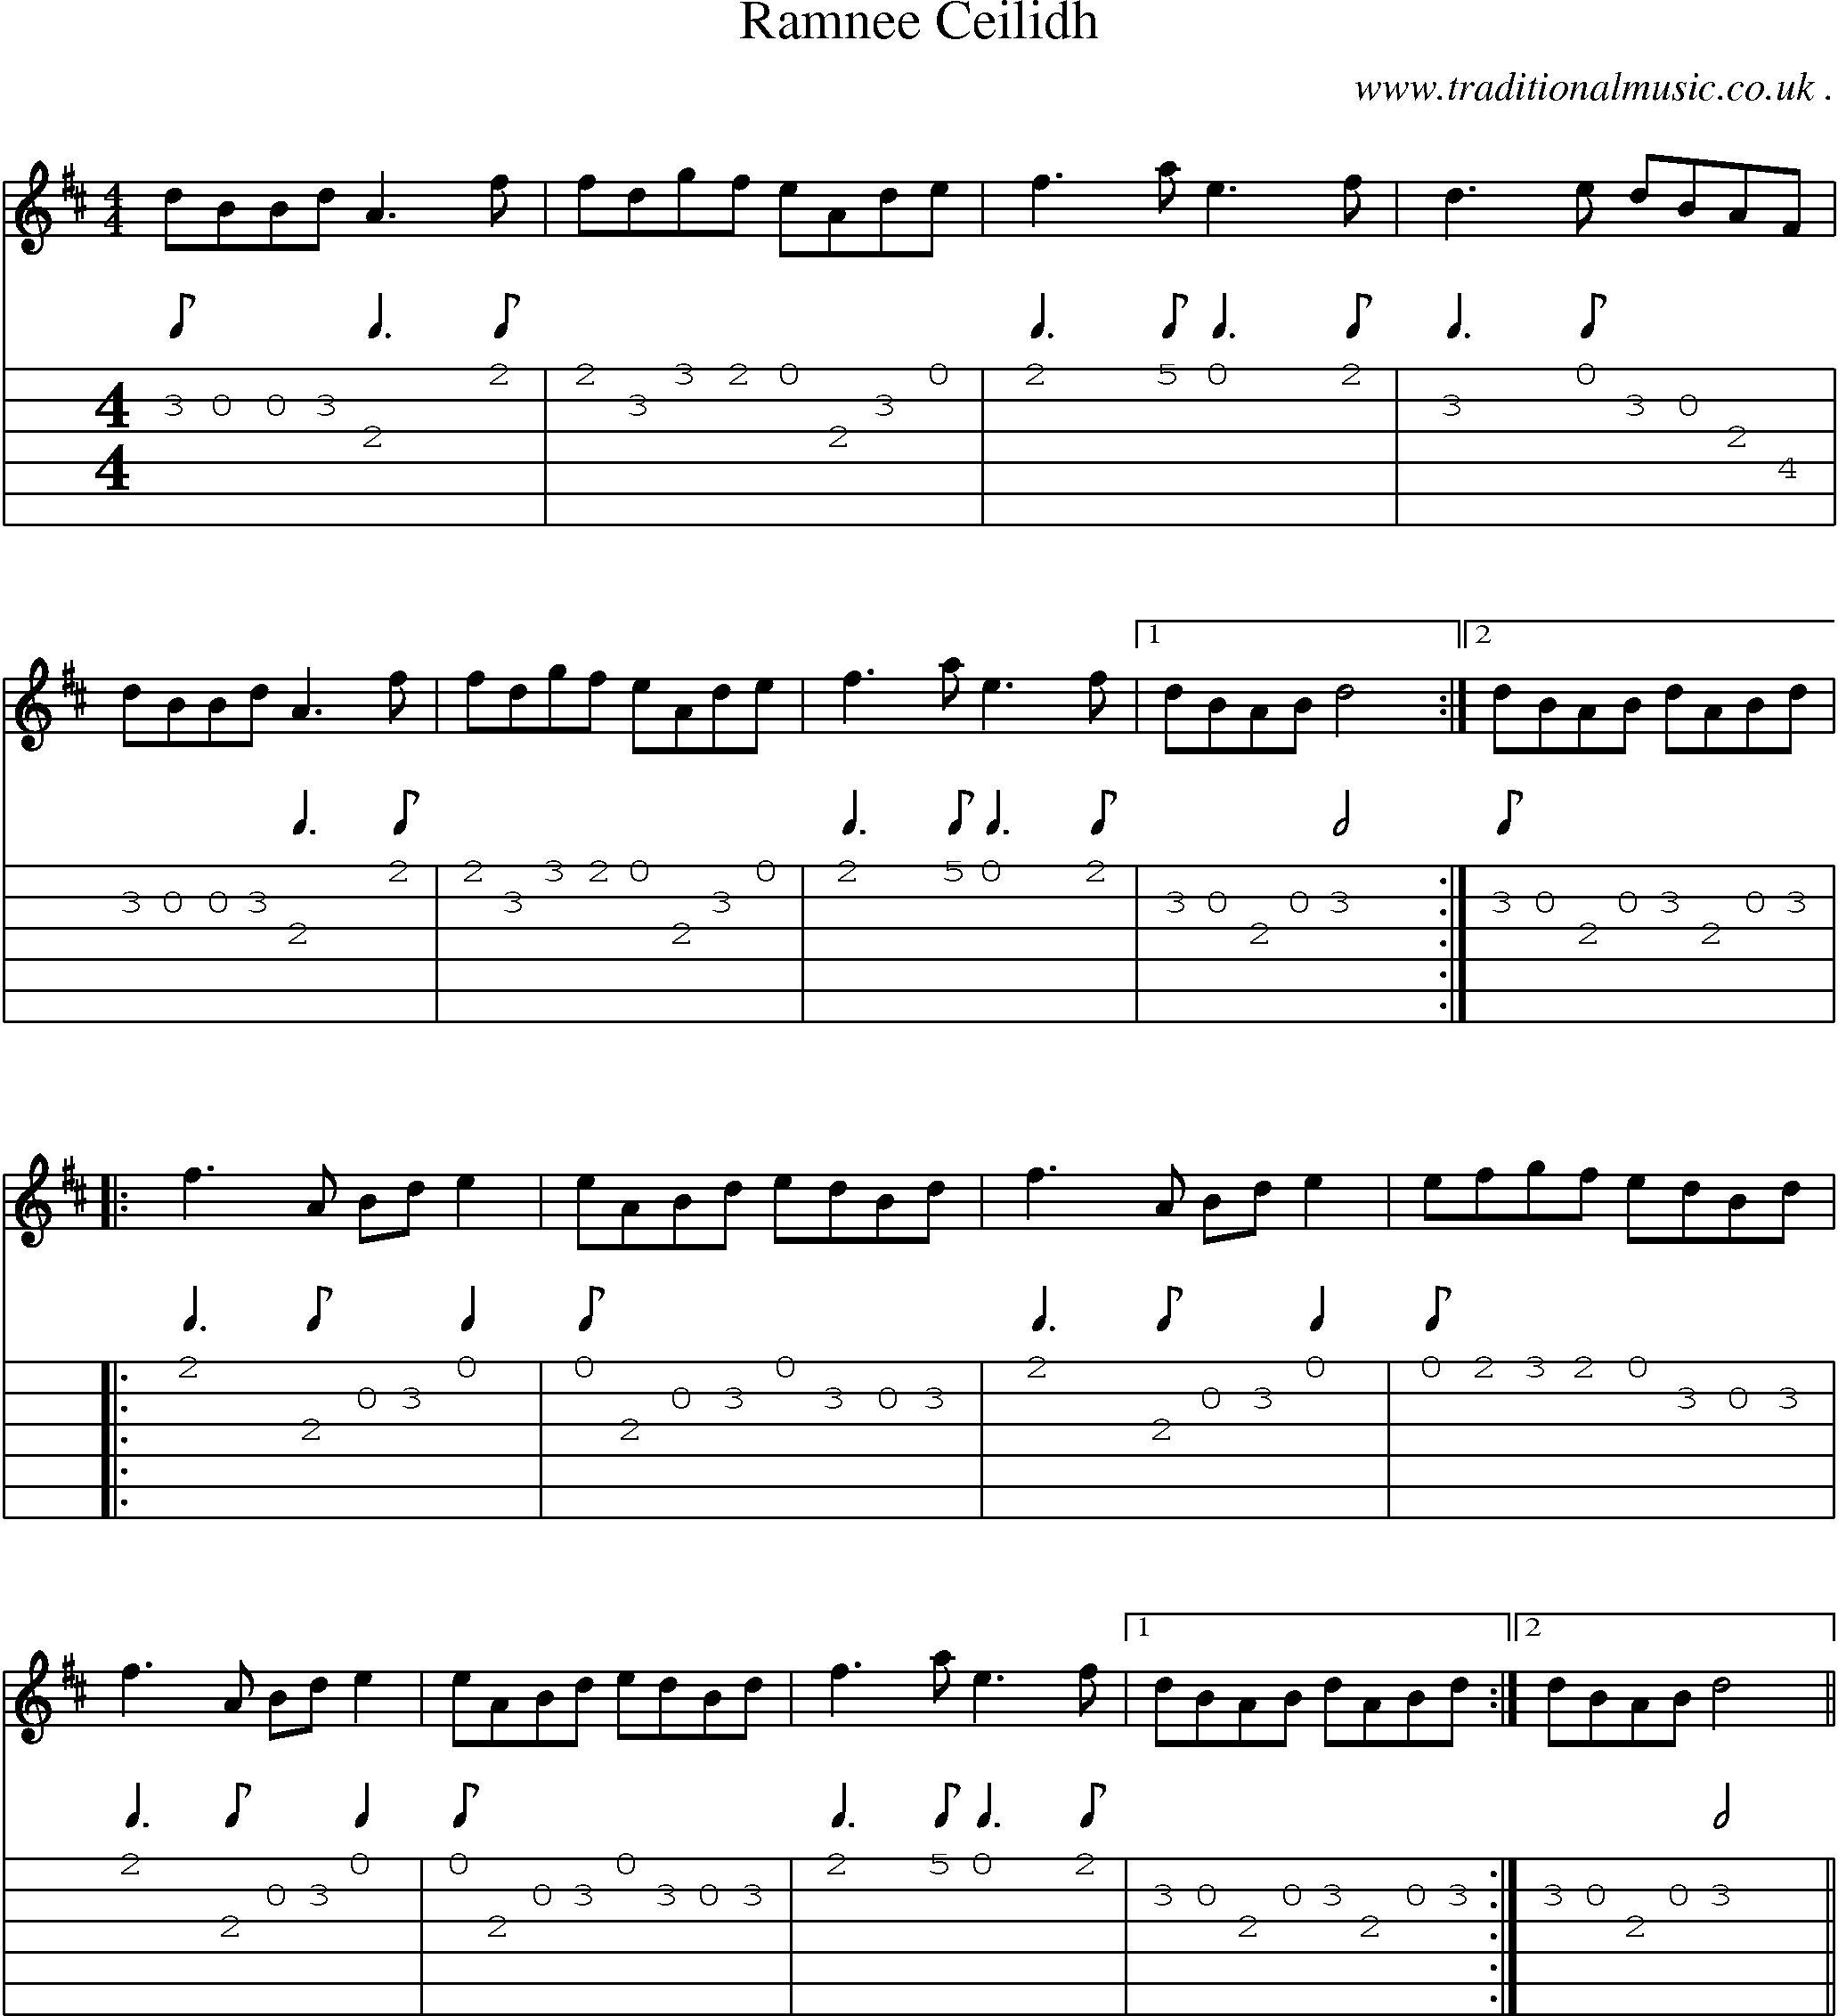 Sheet-Music and Guitar Tabs for Ramnee Ceilidh